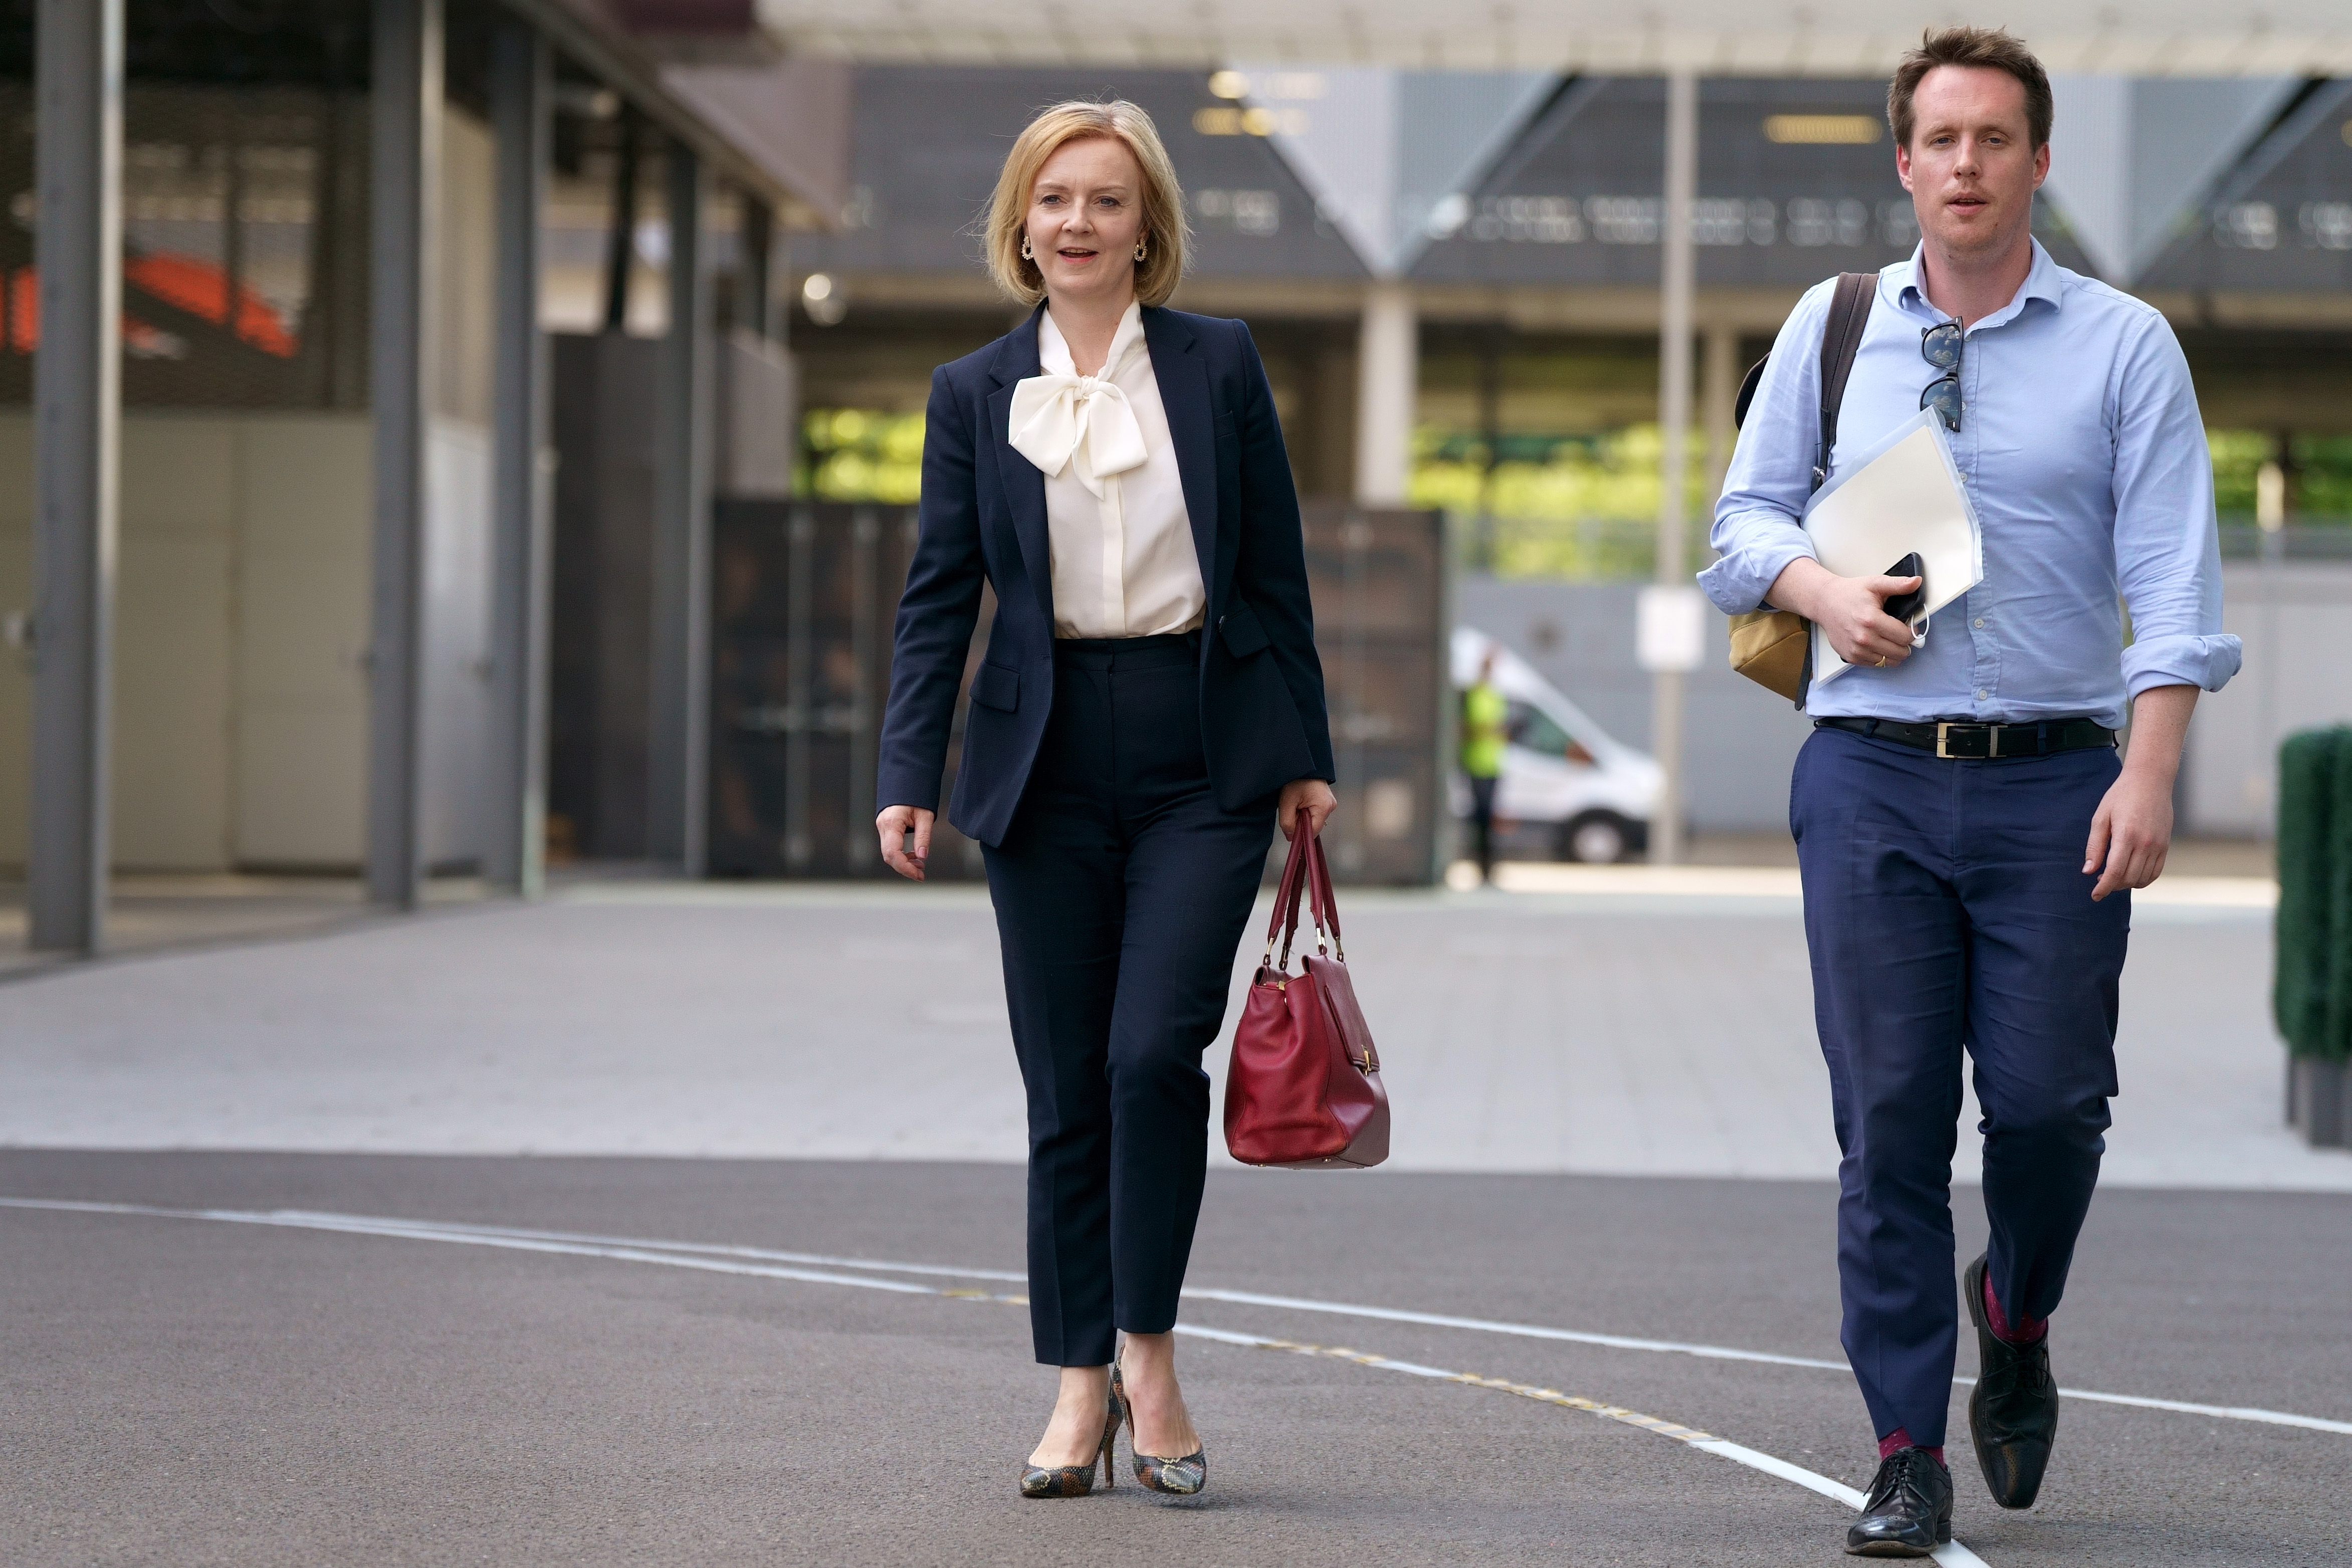 Conservative party leadership contender Liz Truss arrives at Here East studios in Stratford, east London, before the live television debate for the candidates for leadership of the Conservative party, hosted by Channel 4, in July 2022